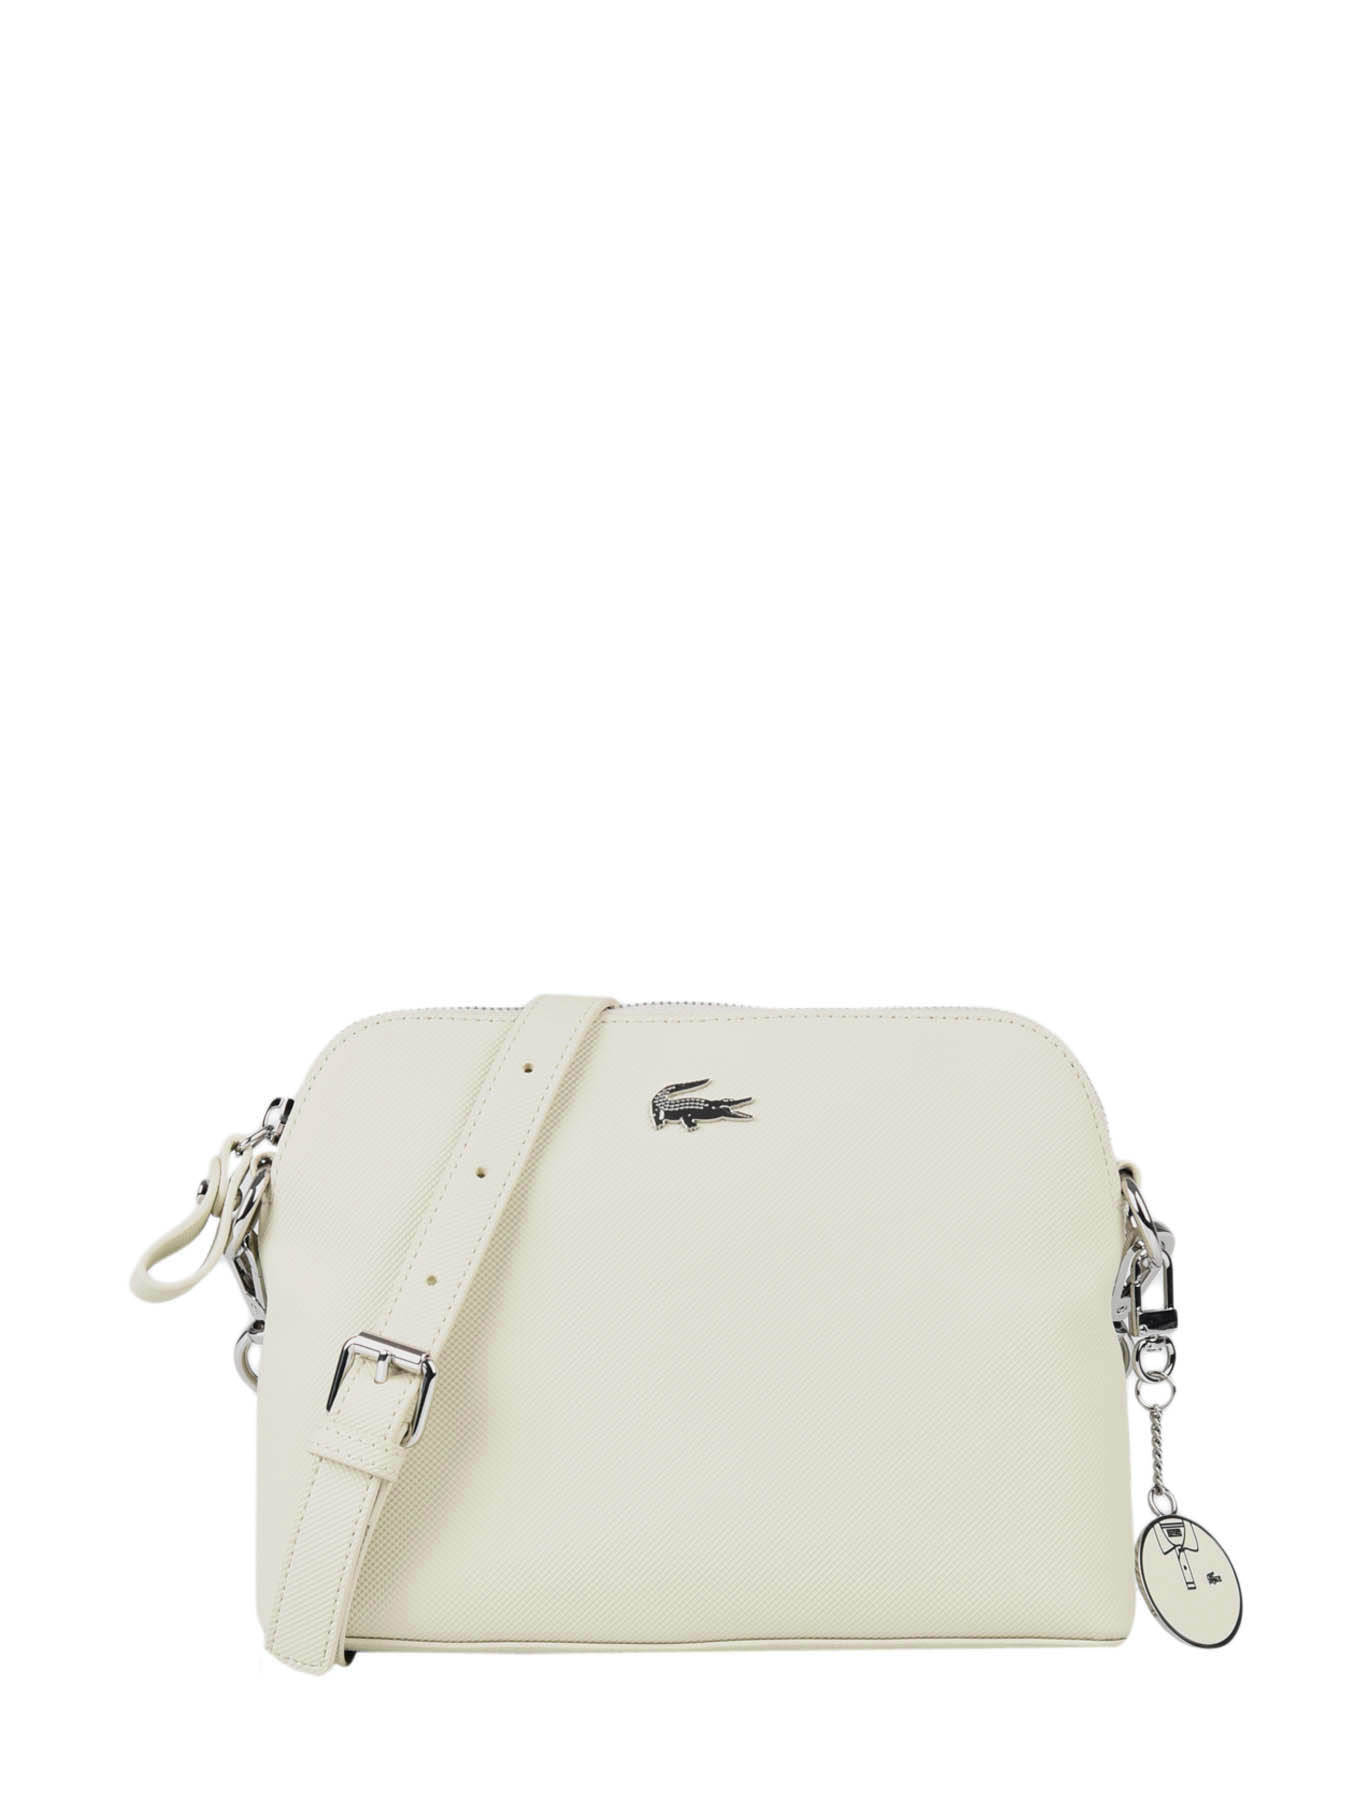 SAC BANDOULIERE Daily classics LACOSTE